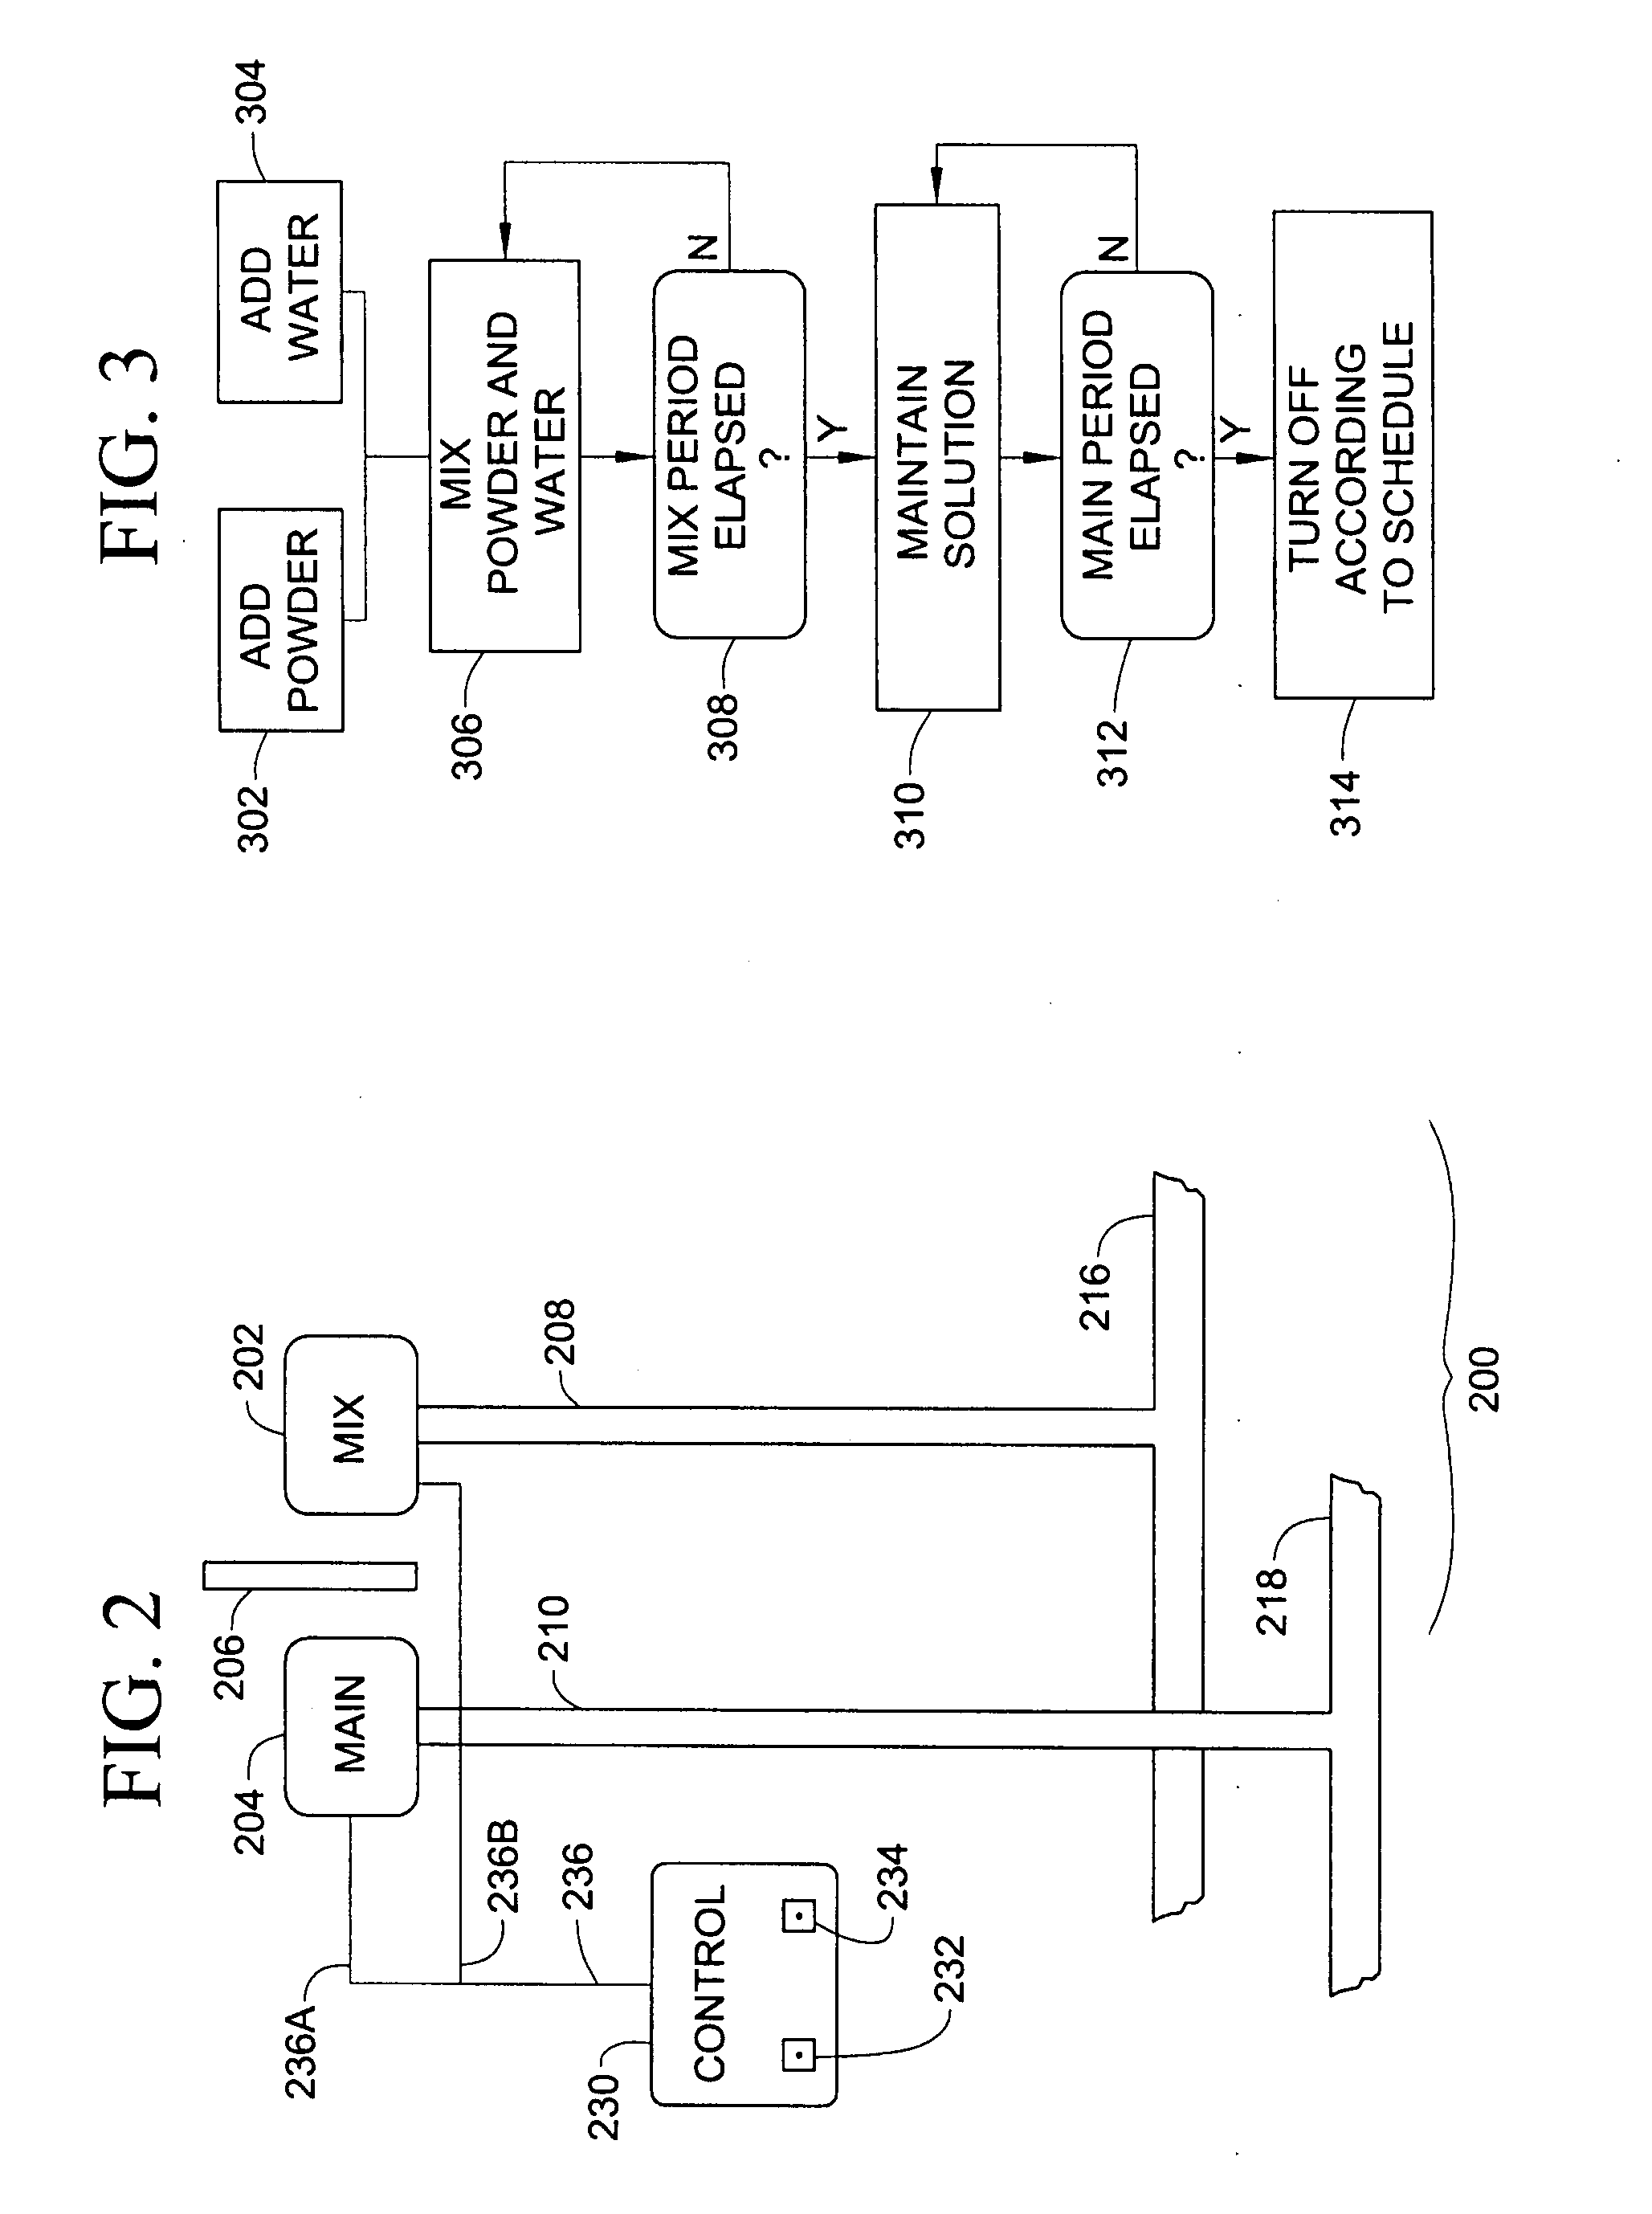 System and assembly for dissolving powders and/or diluting concentrated liquids to obtain a solution having desired concentrations of a plurality of solutes